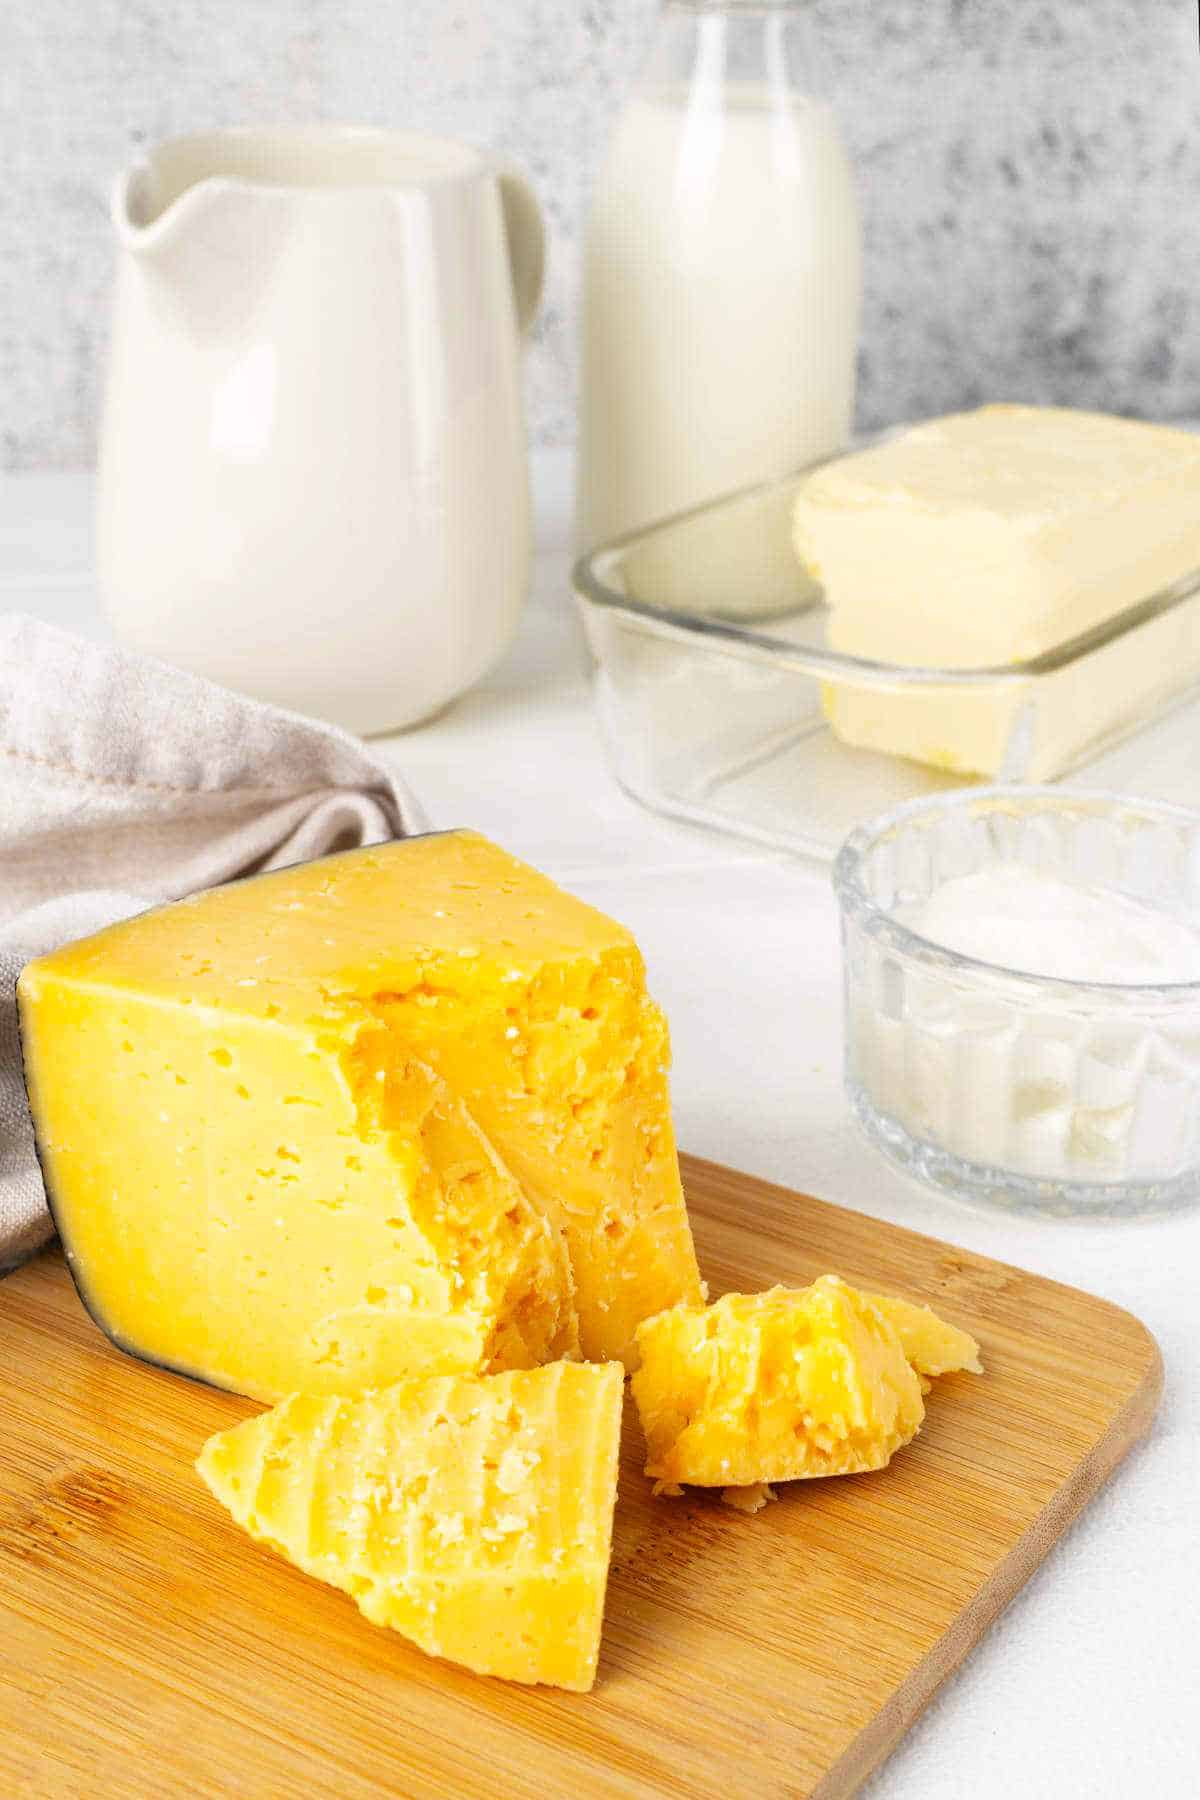 ingredients for cheddar cheese fondue.